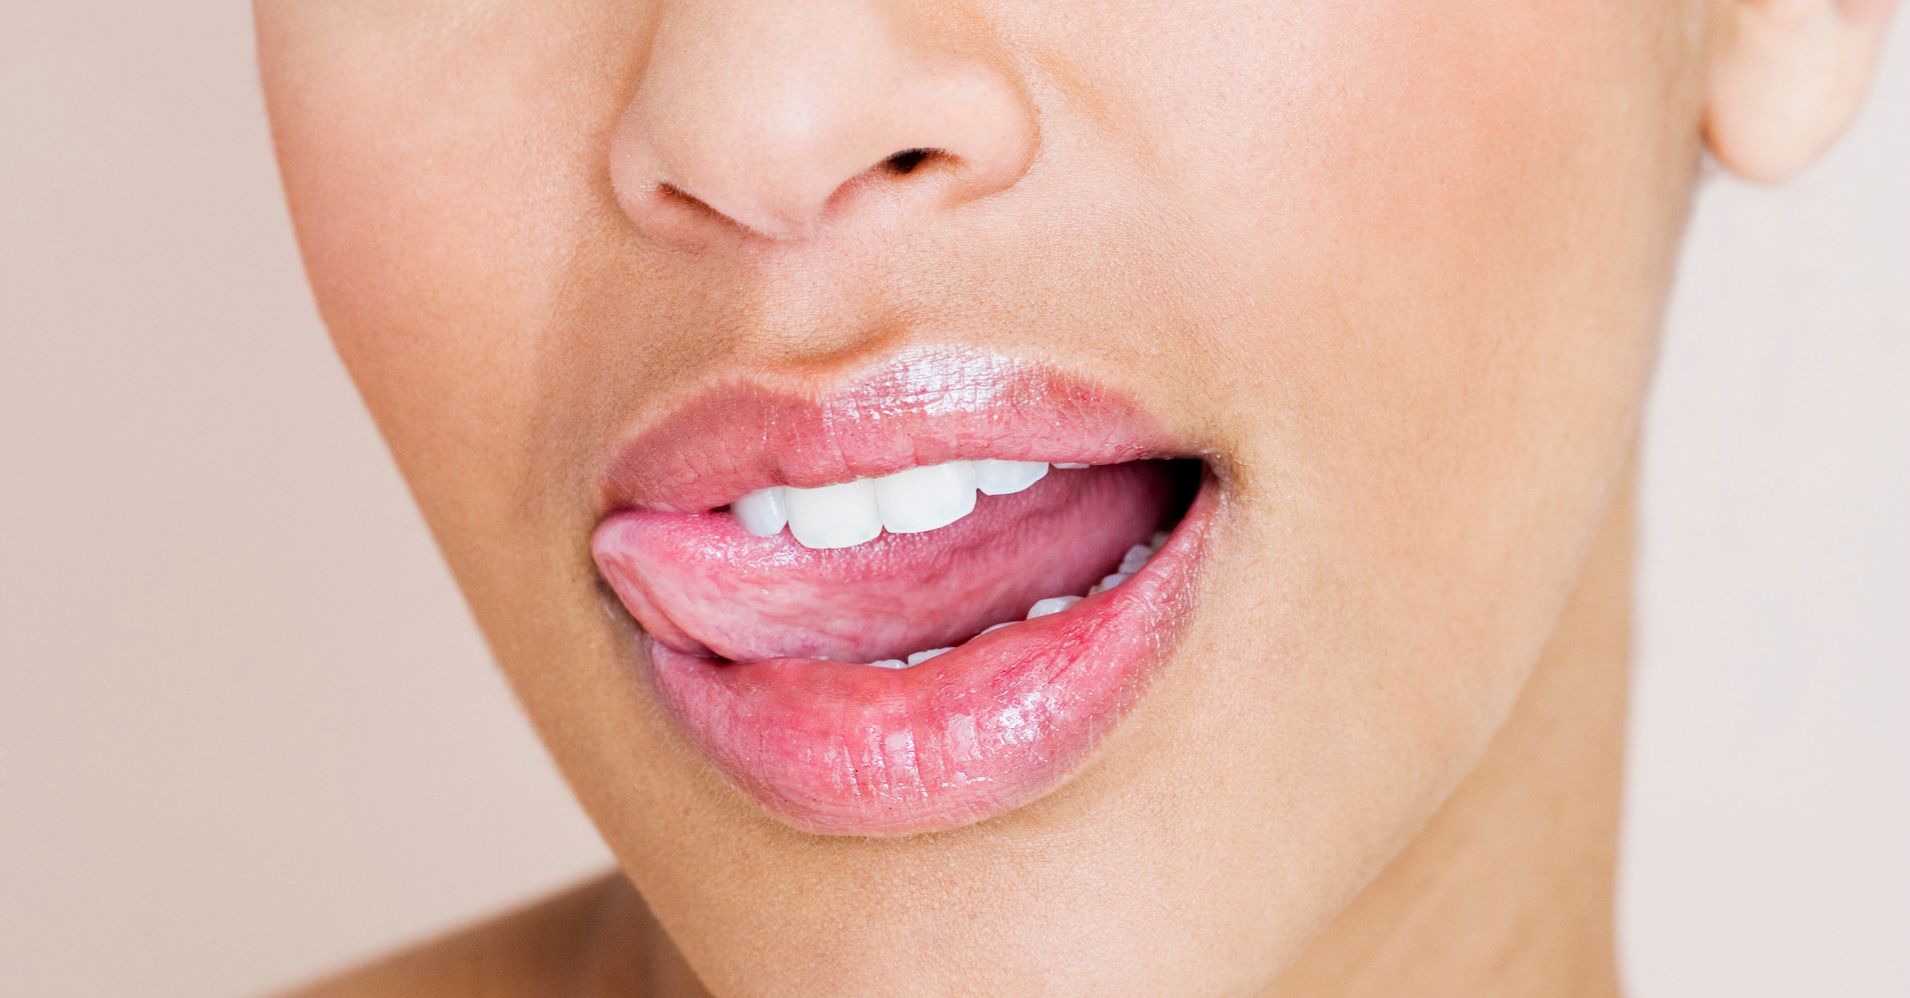 5-things-that-can-make-chapped-lips-worse-according-to-dermatologists